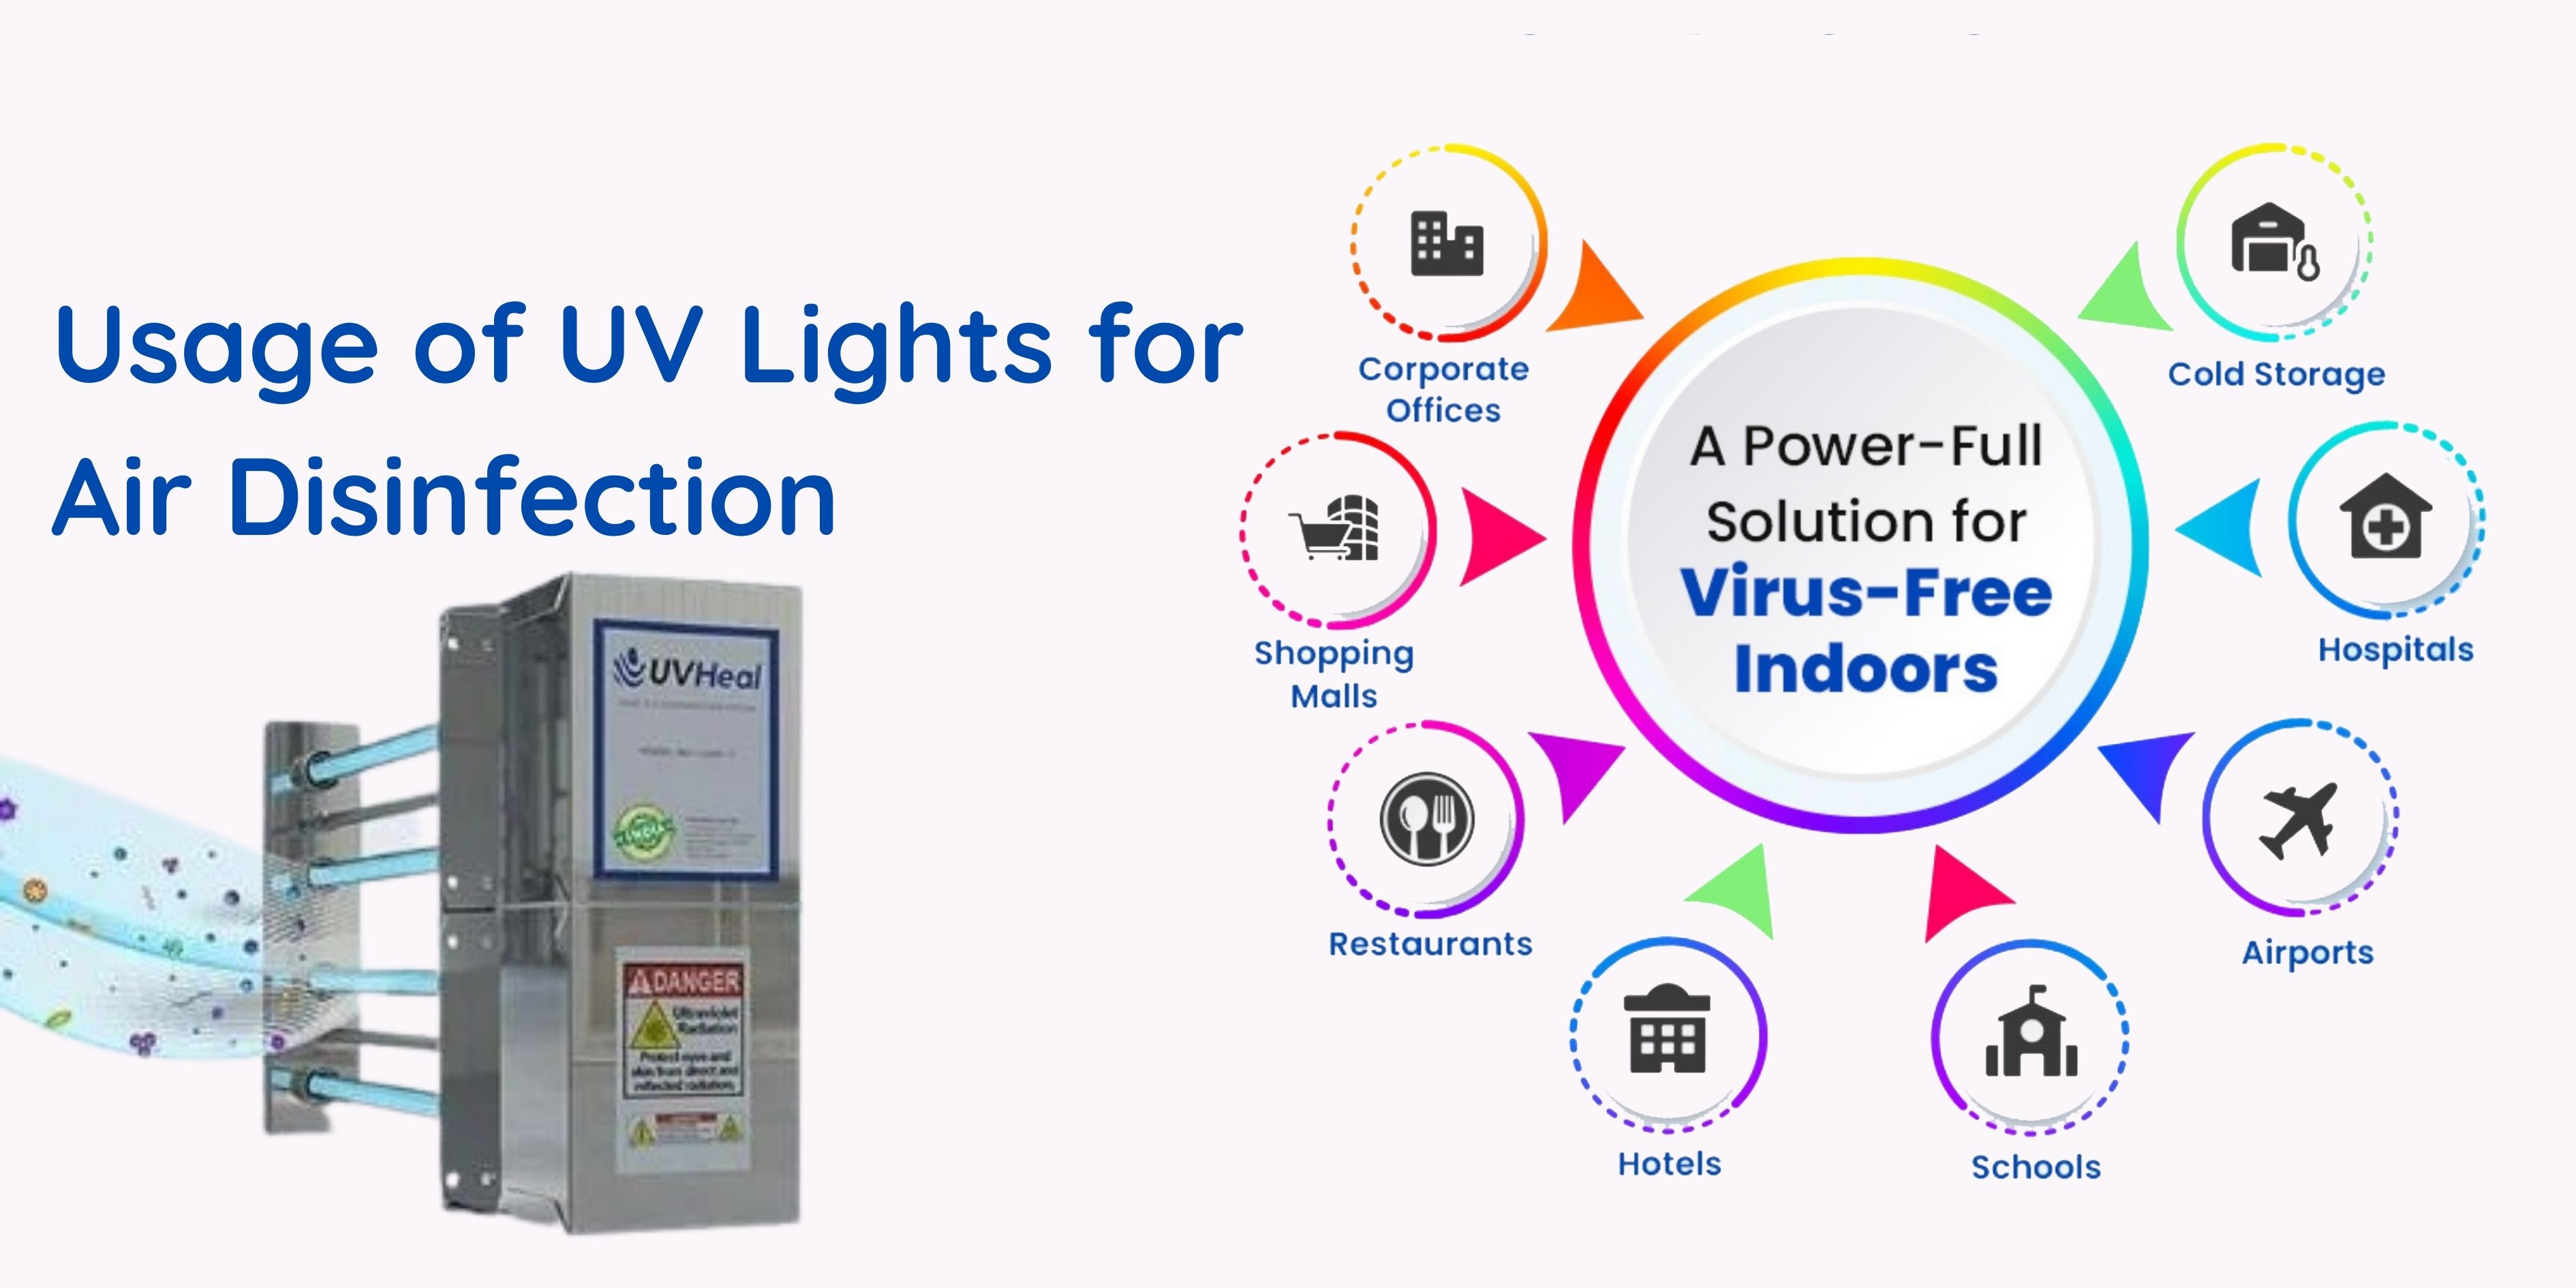 Usage of UV Lights for Air Disinfection - UVGI System for HVAC Usage of UV Lights for Air Disinfection - UVGI System for HVAC